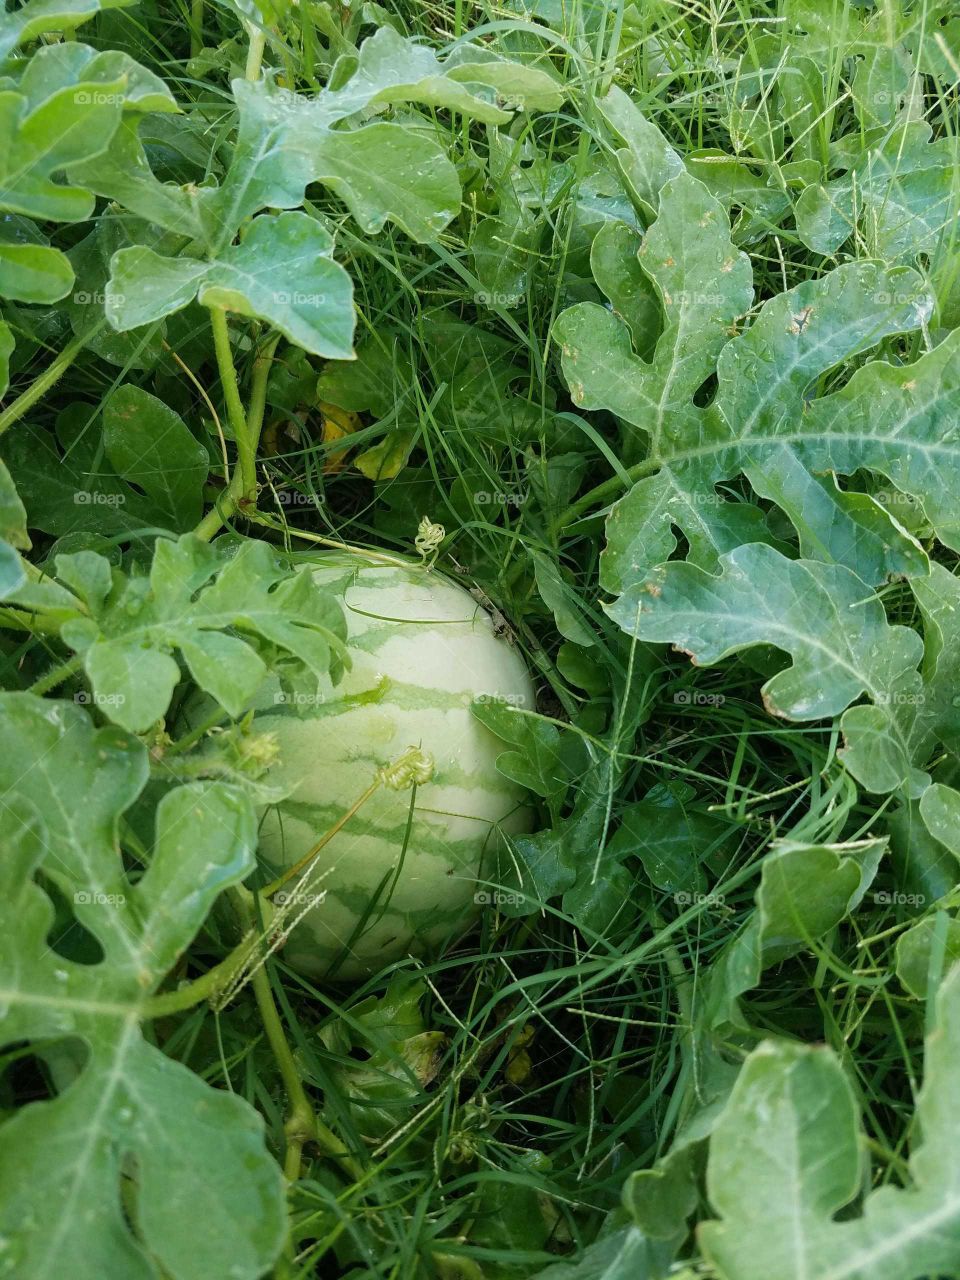 Our frist watermelon  plant,that is growing our watermelon.it's going to take some time before we can pick this one. because it is still small. that one is done it's going to be very delicious